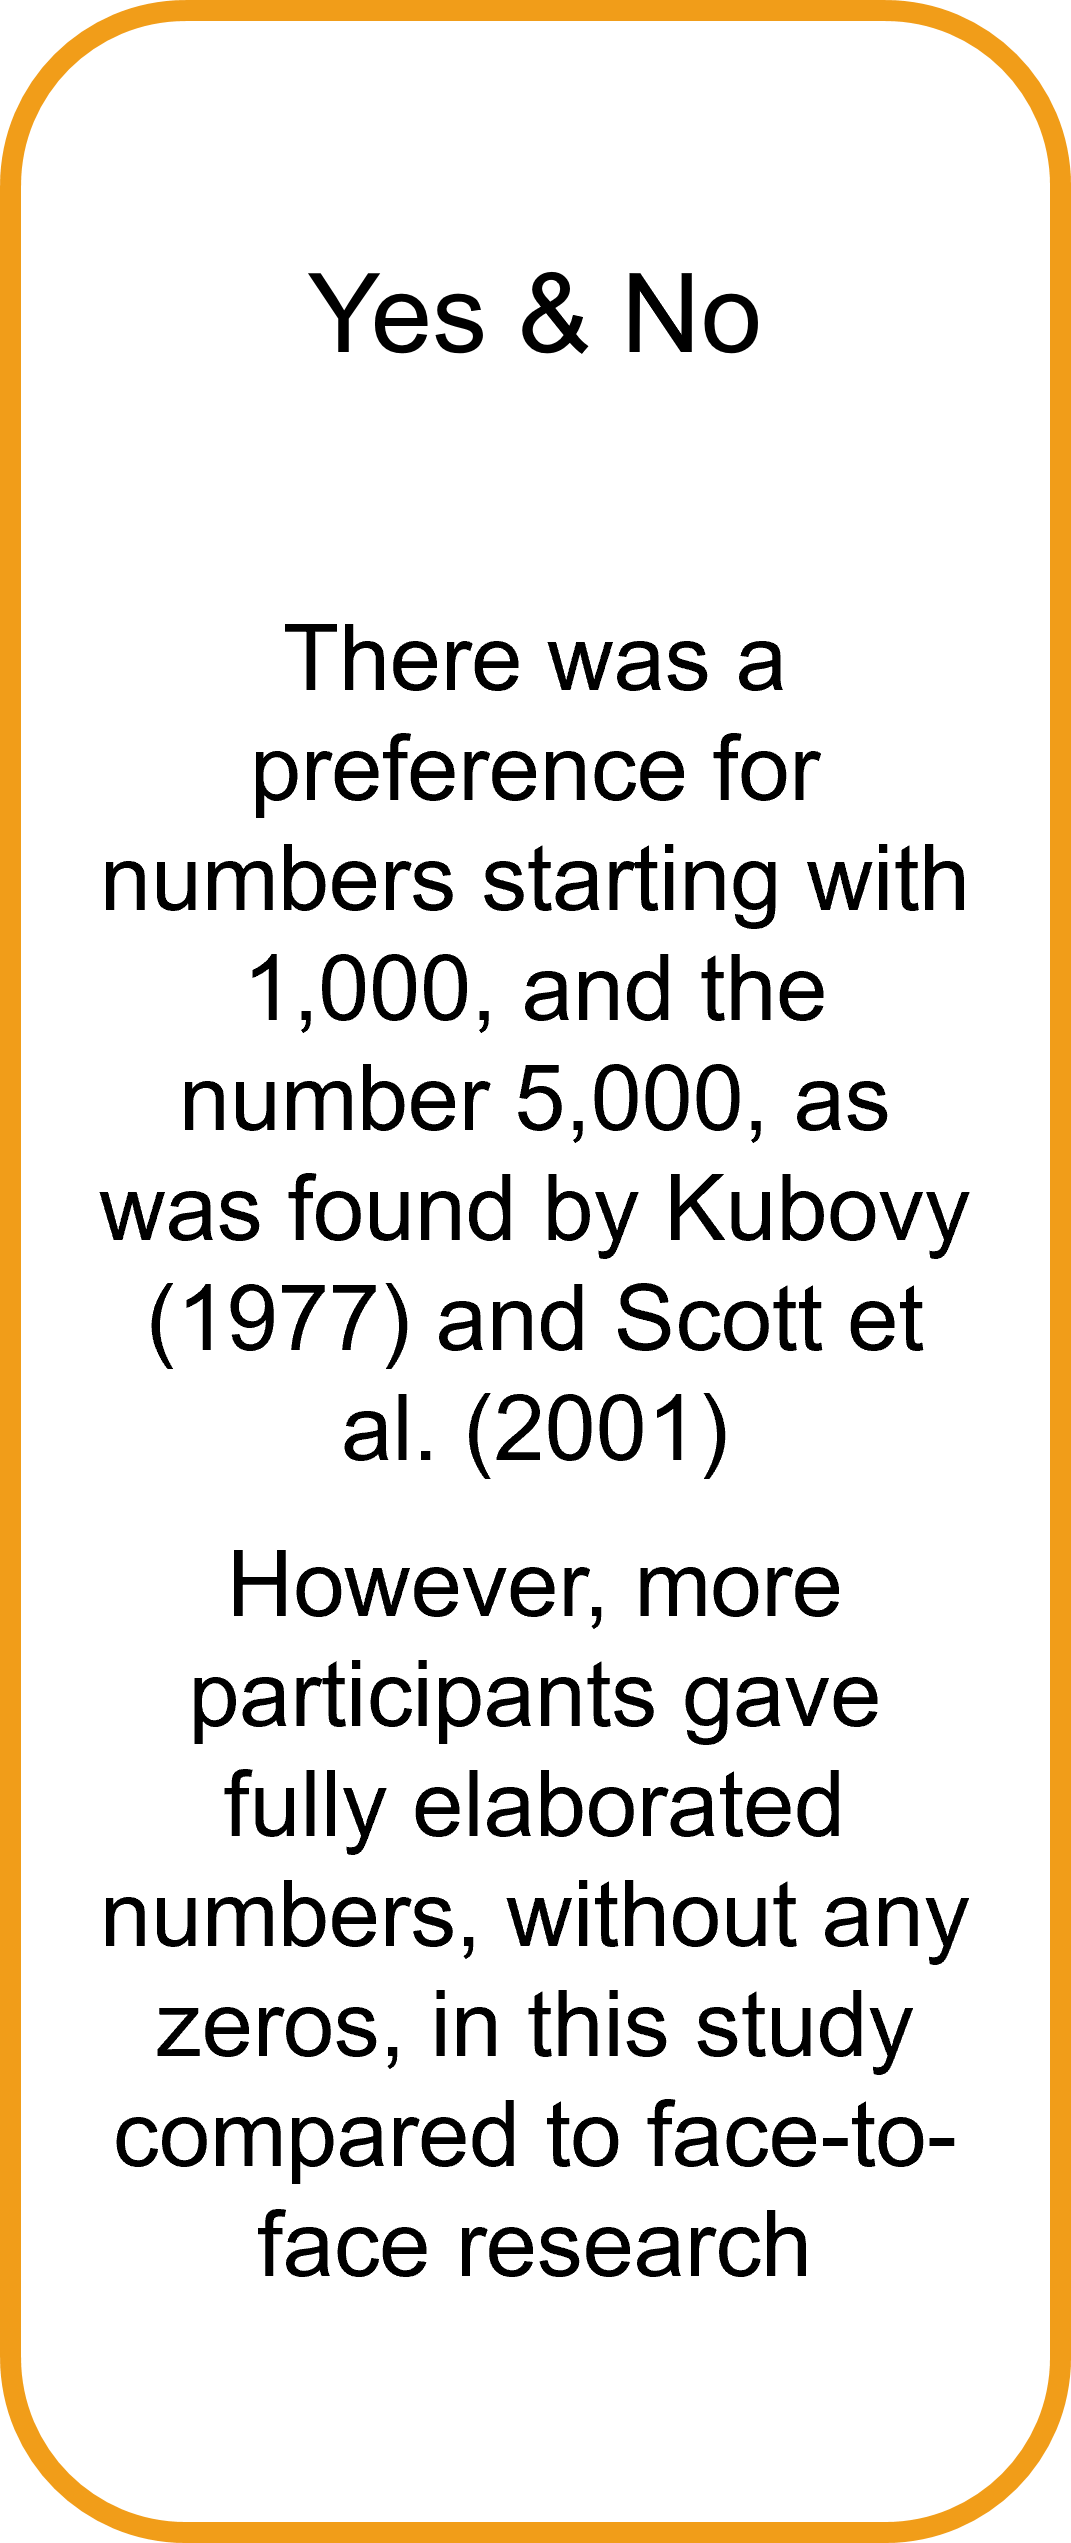 2. Do number generation patterns found in an online study match those found in previous face-to-face research? Yes & No   There was a preference for numbers starting with 1,000, and the number 5,000, as was found by Kubovy (1977) and Scott et al. (2001)  However, more participants gave fully elaborated numbers, without any zeros, in this study compared to face-to-face research